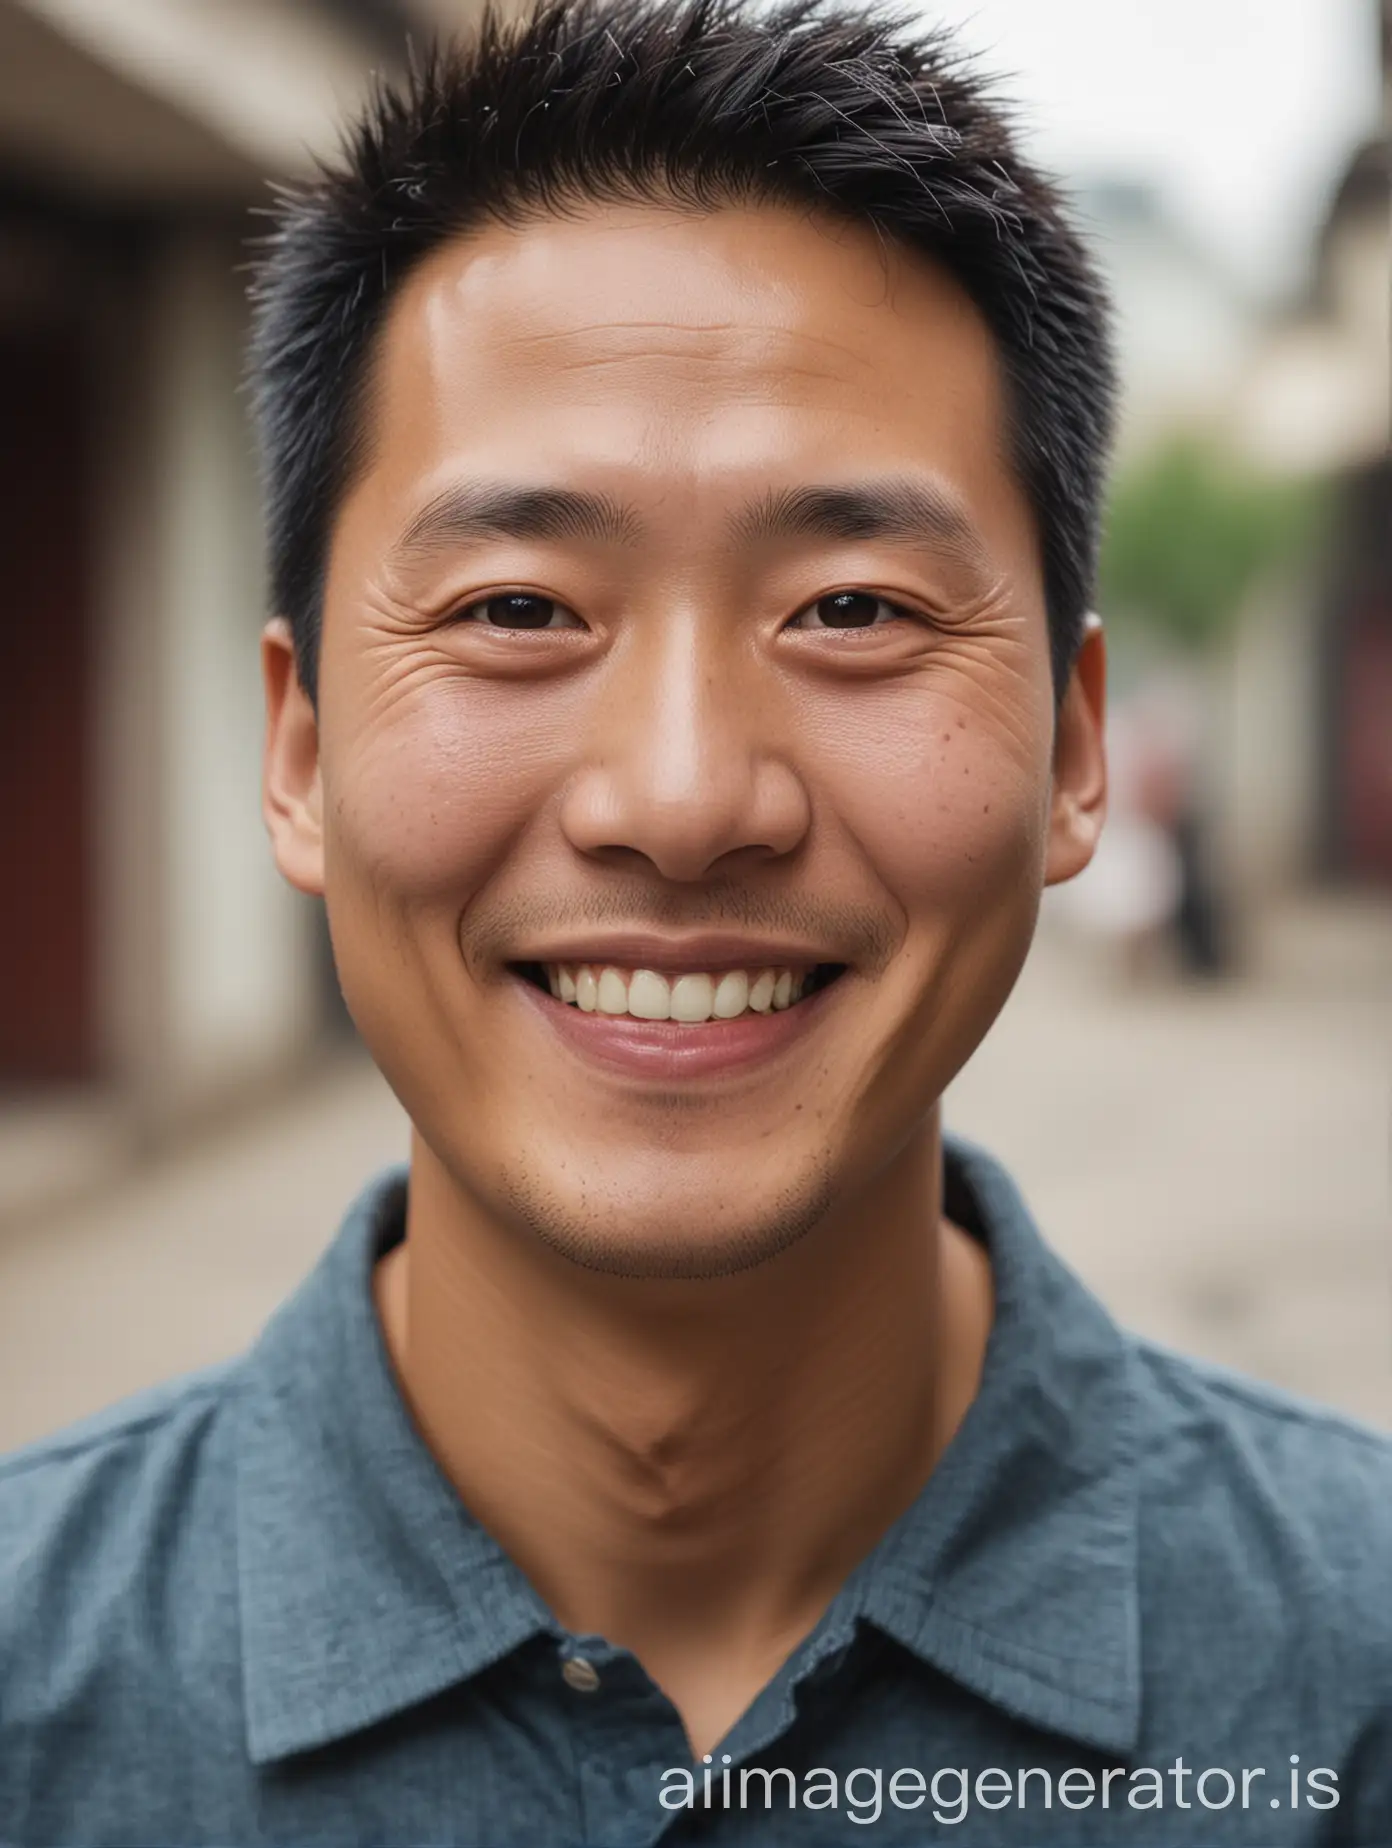 A happy Chinese man looking directly at the camera